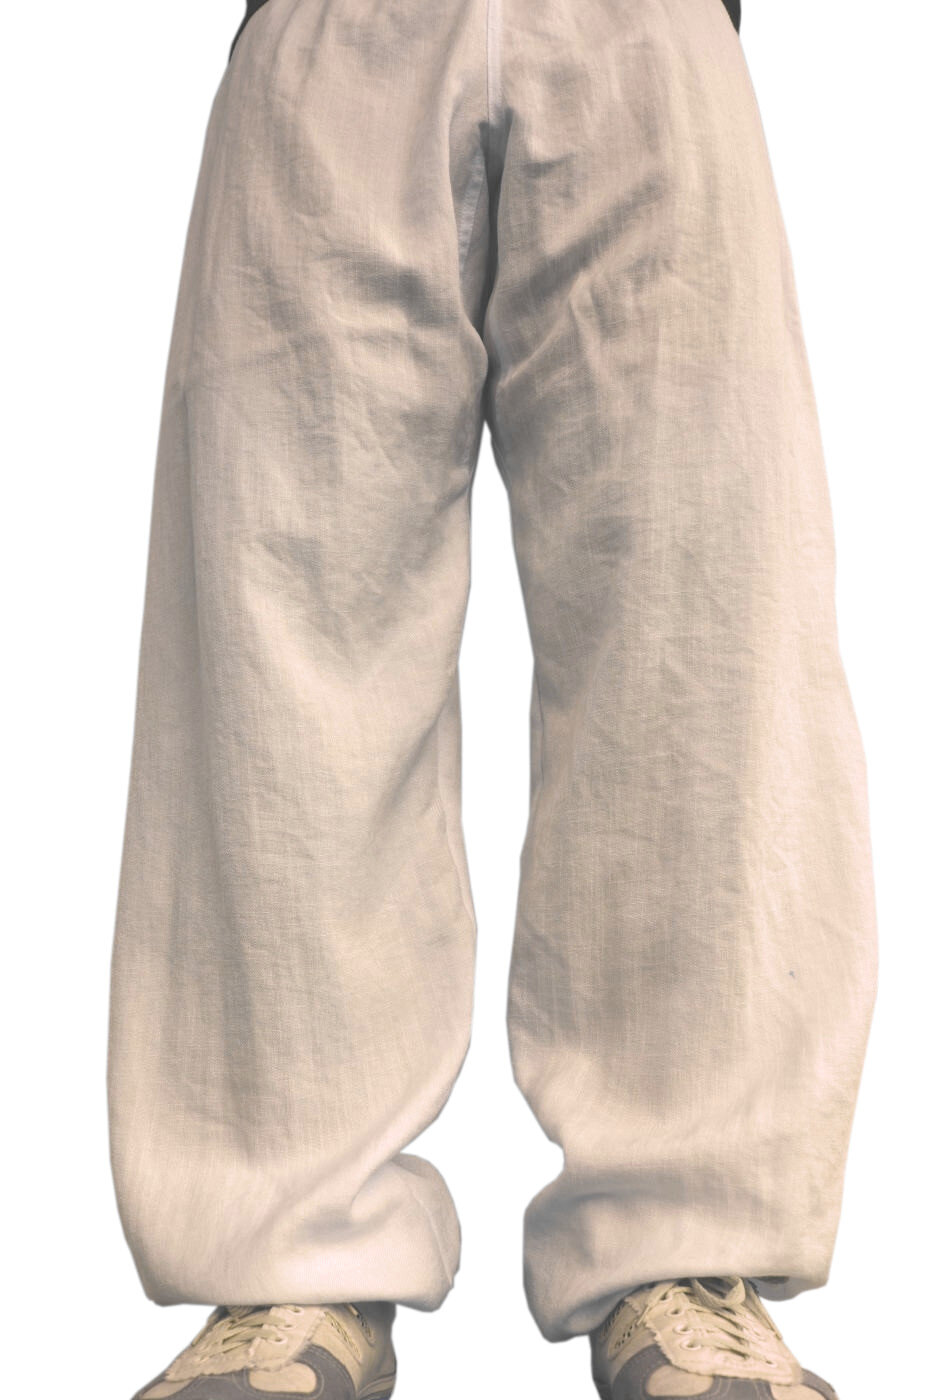 Martial arts trousers